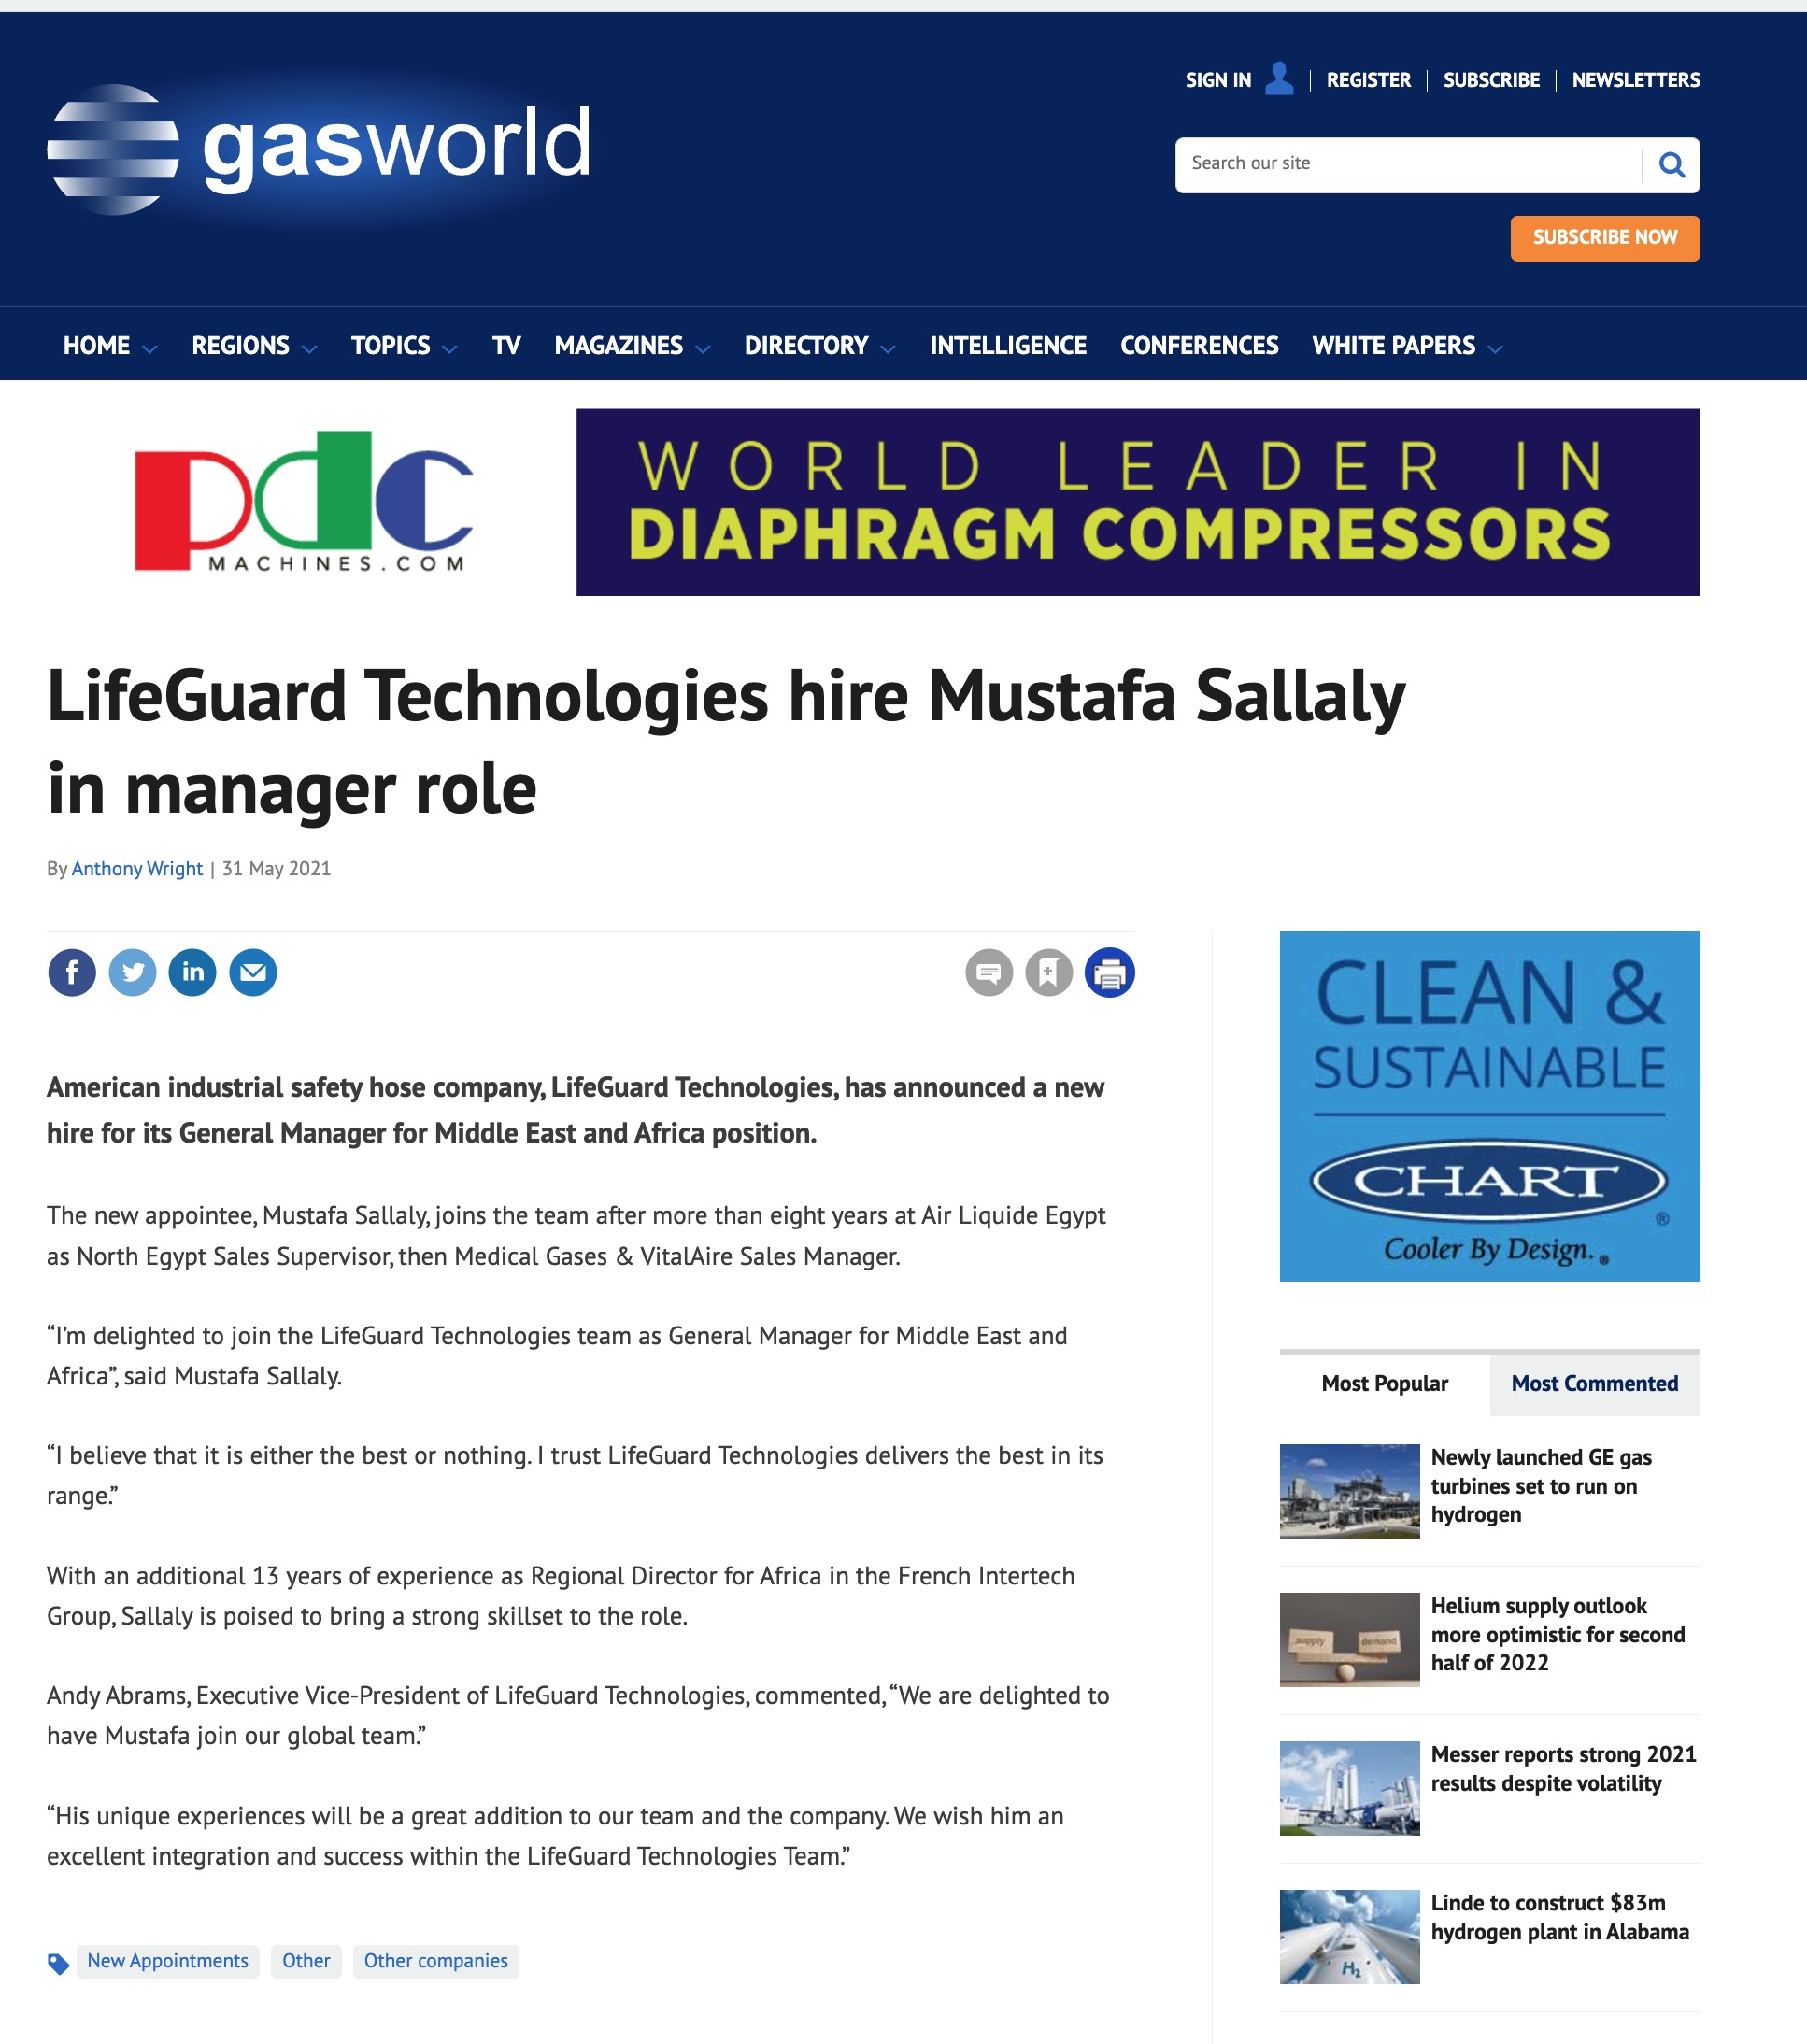 LifeGuard Technologies hire Mustafa Sallaly in manager role